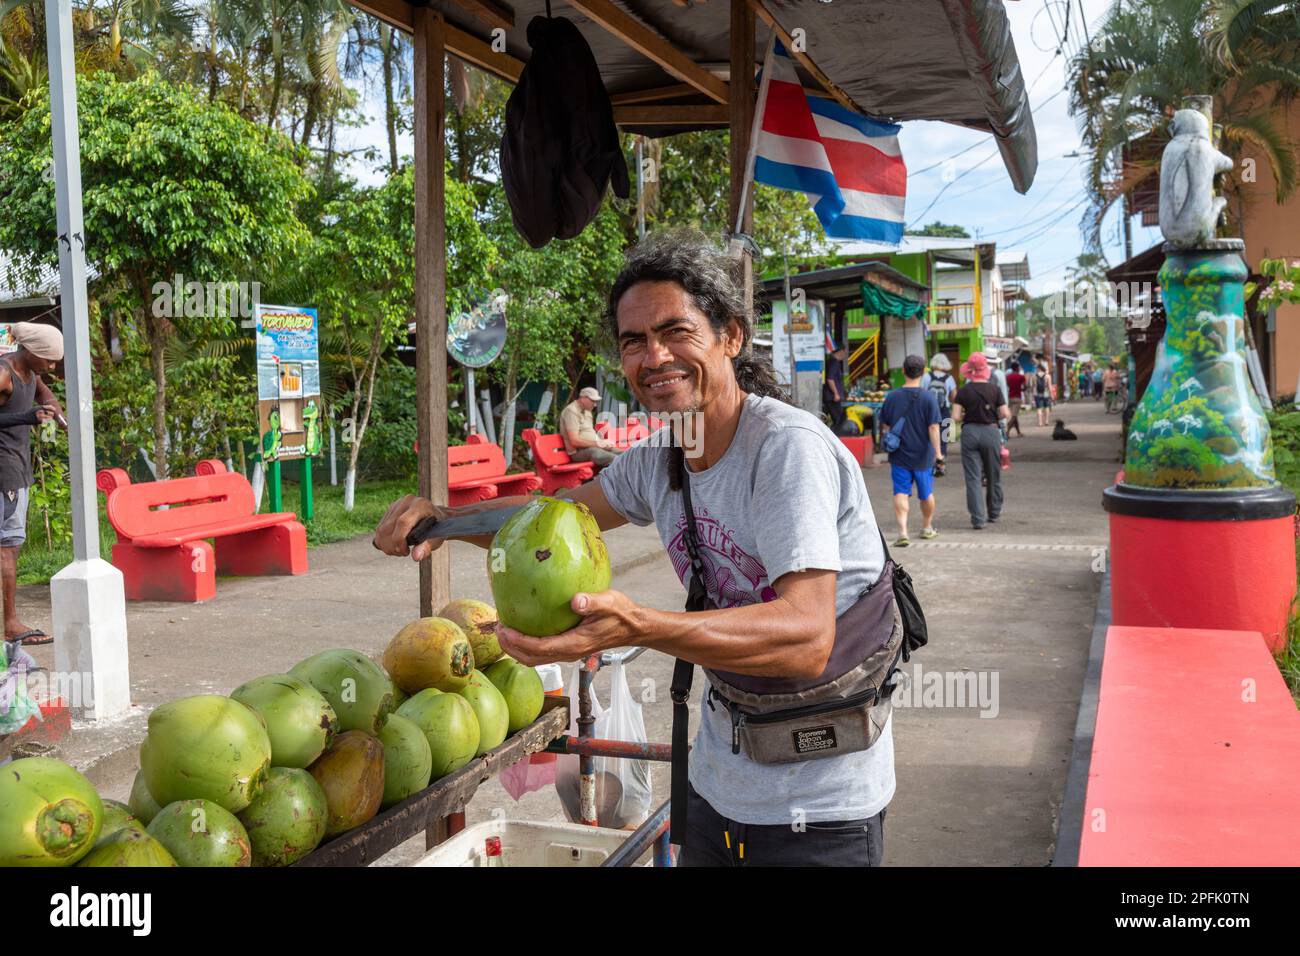 Tortuguero, Costa Rica - A street vendor cuts open a green coconut for a tourist in this small village on the Caribbean coast. The refreshing coconut Stock Photo